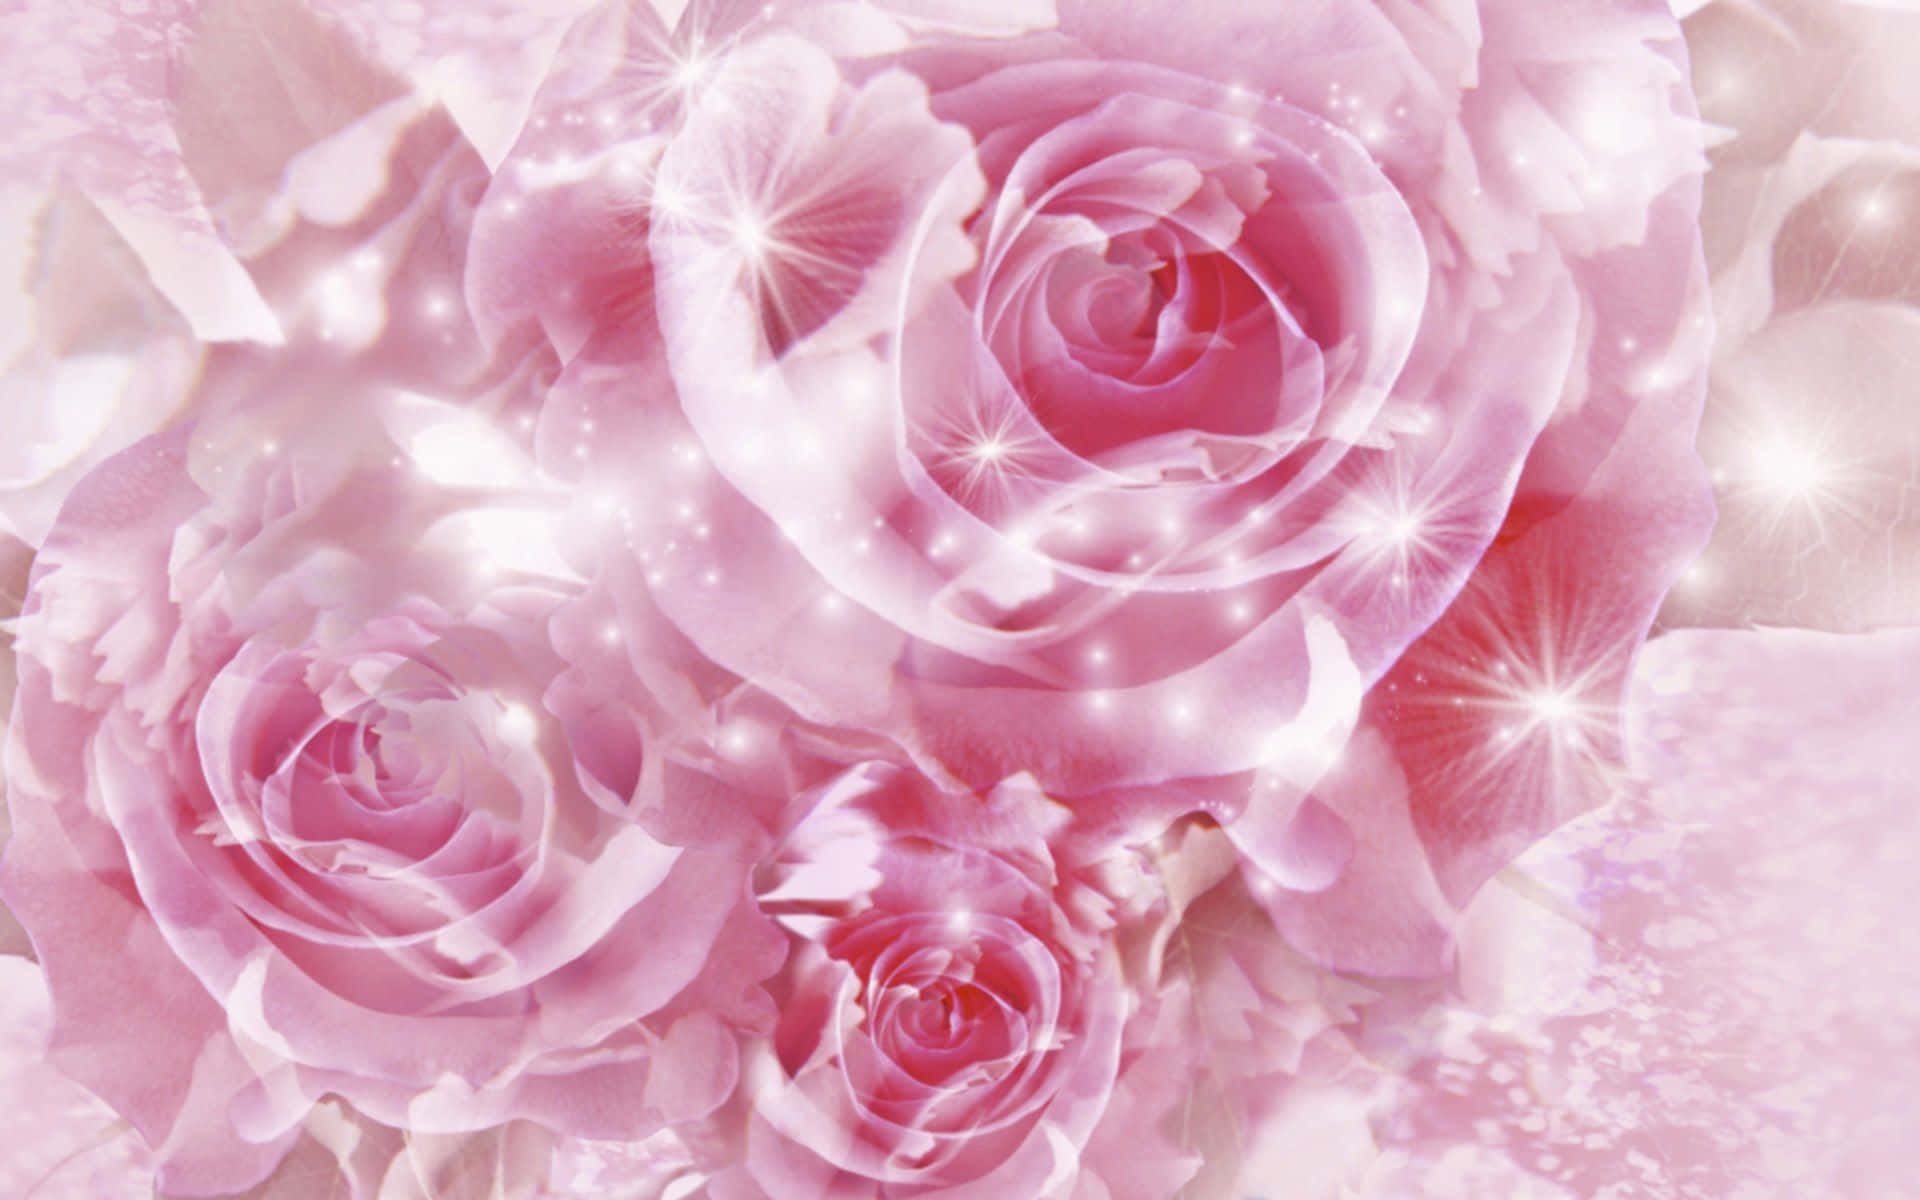 Pink Roses With Sparkly Effect Background